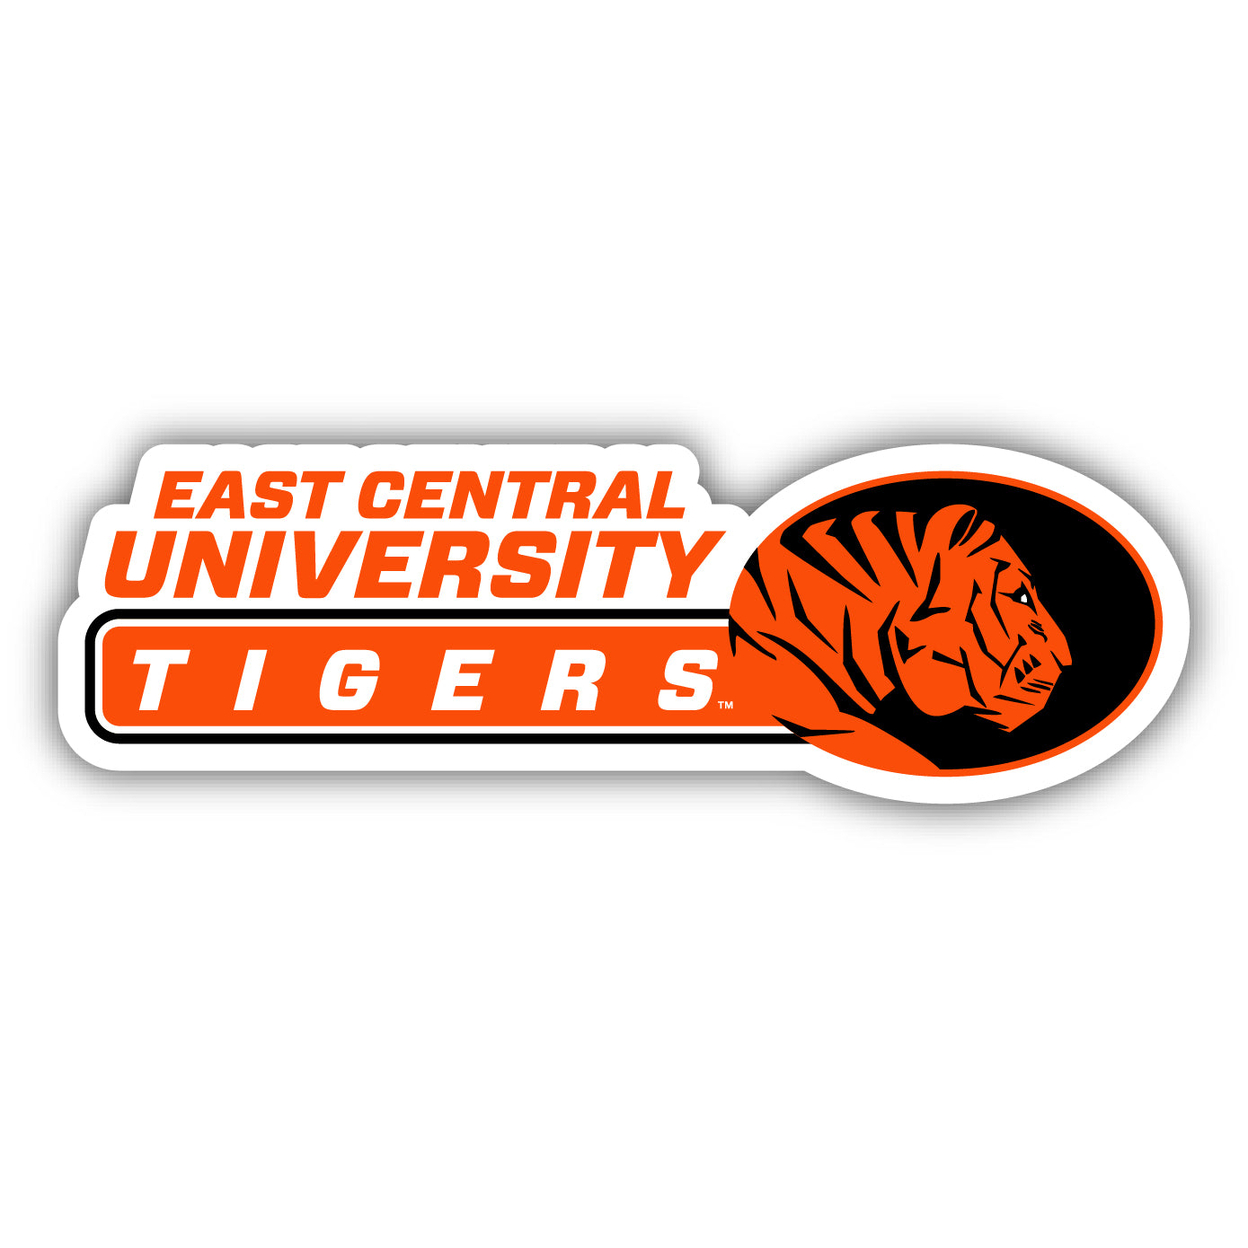 East Central University Tigers 4 Inch Wide Colorful Vinyl Decal Sticker